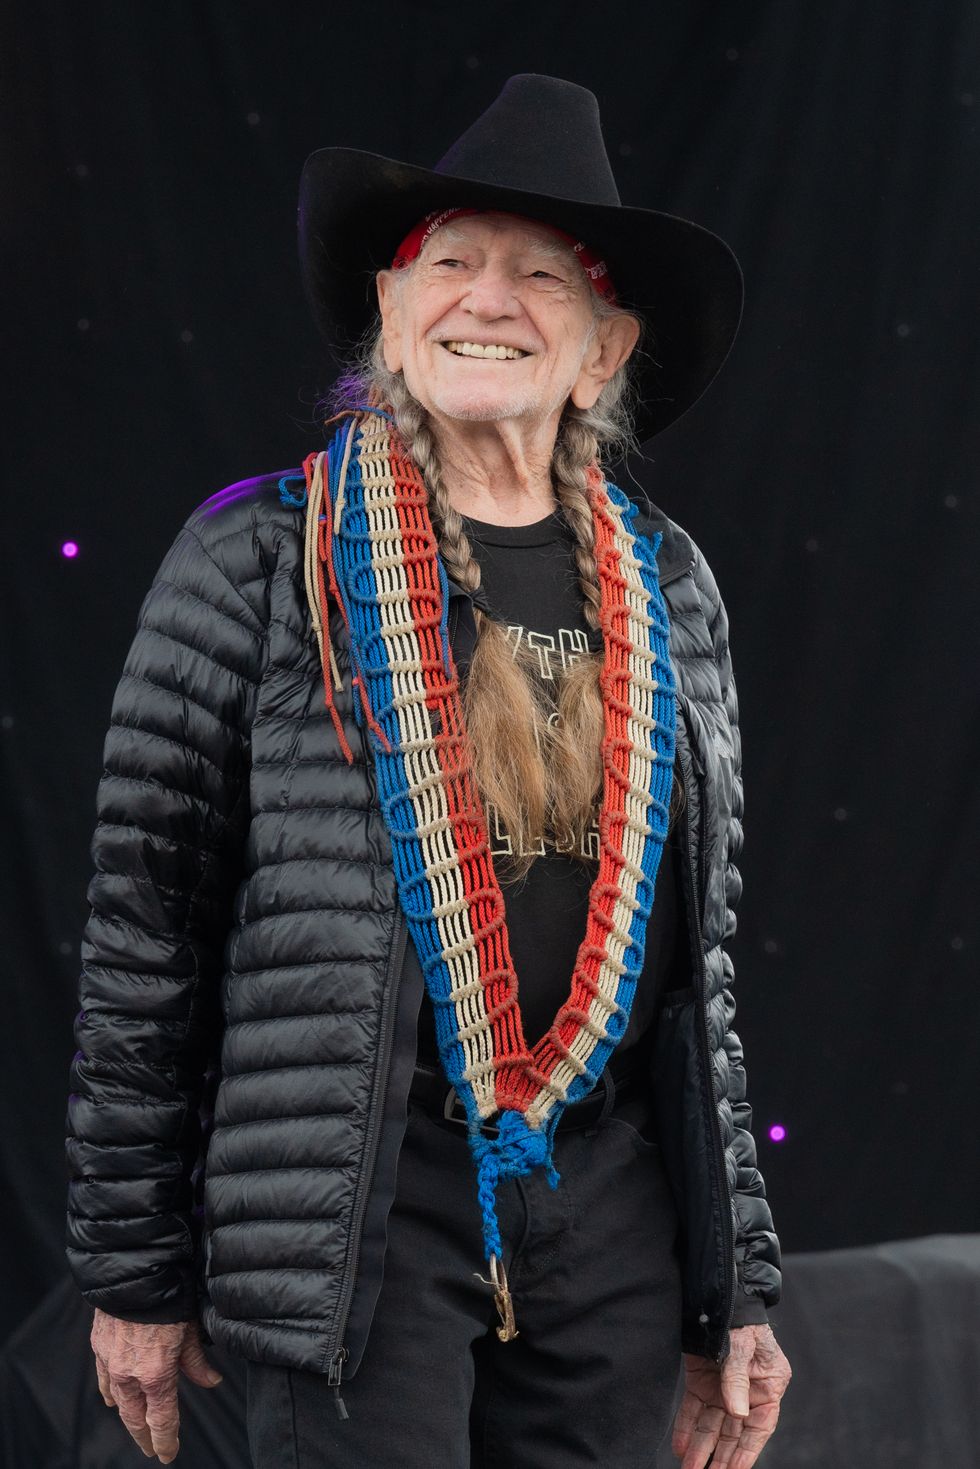 willie nelson wearing a cowboy hat and smiling as he looks into the crowd